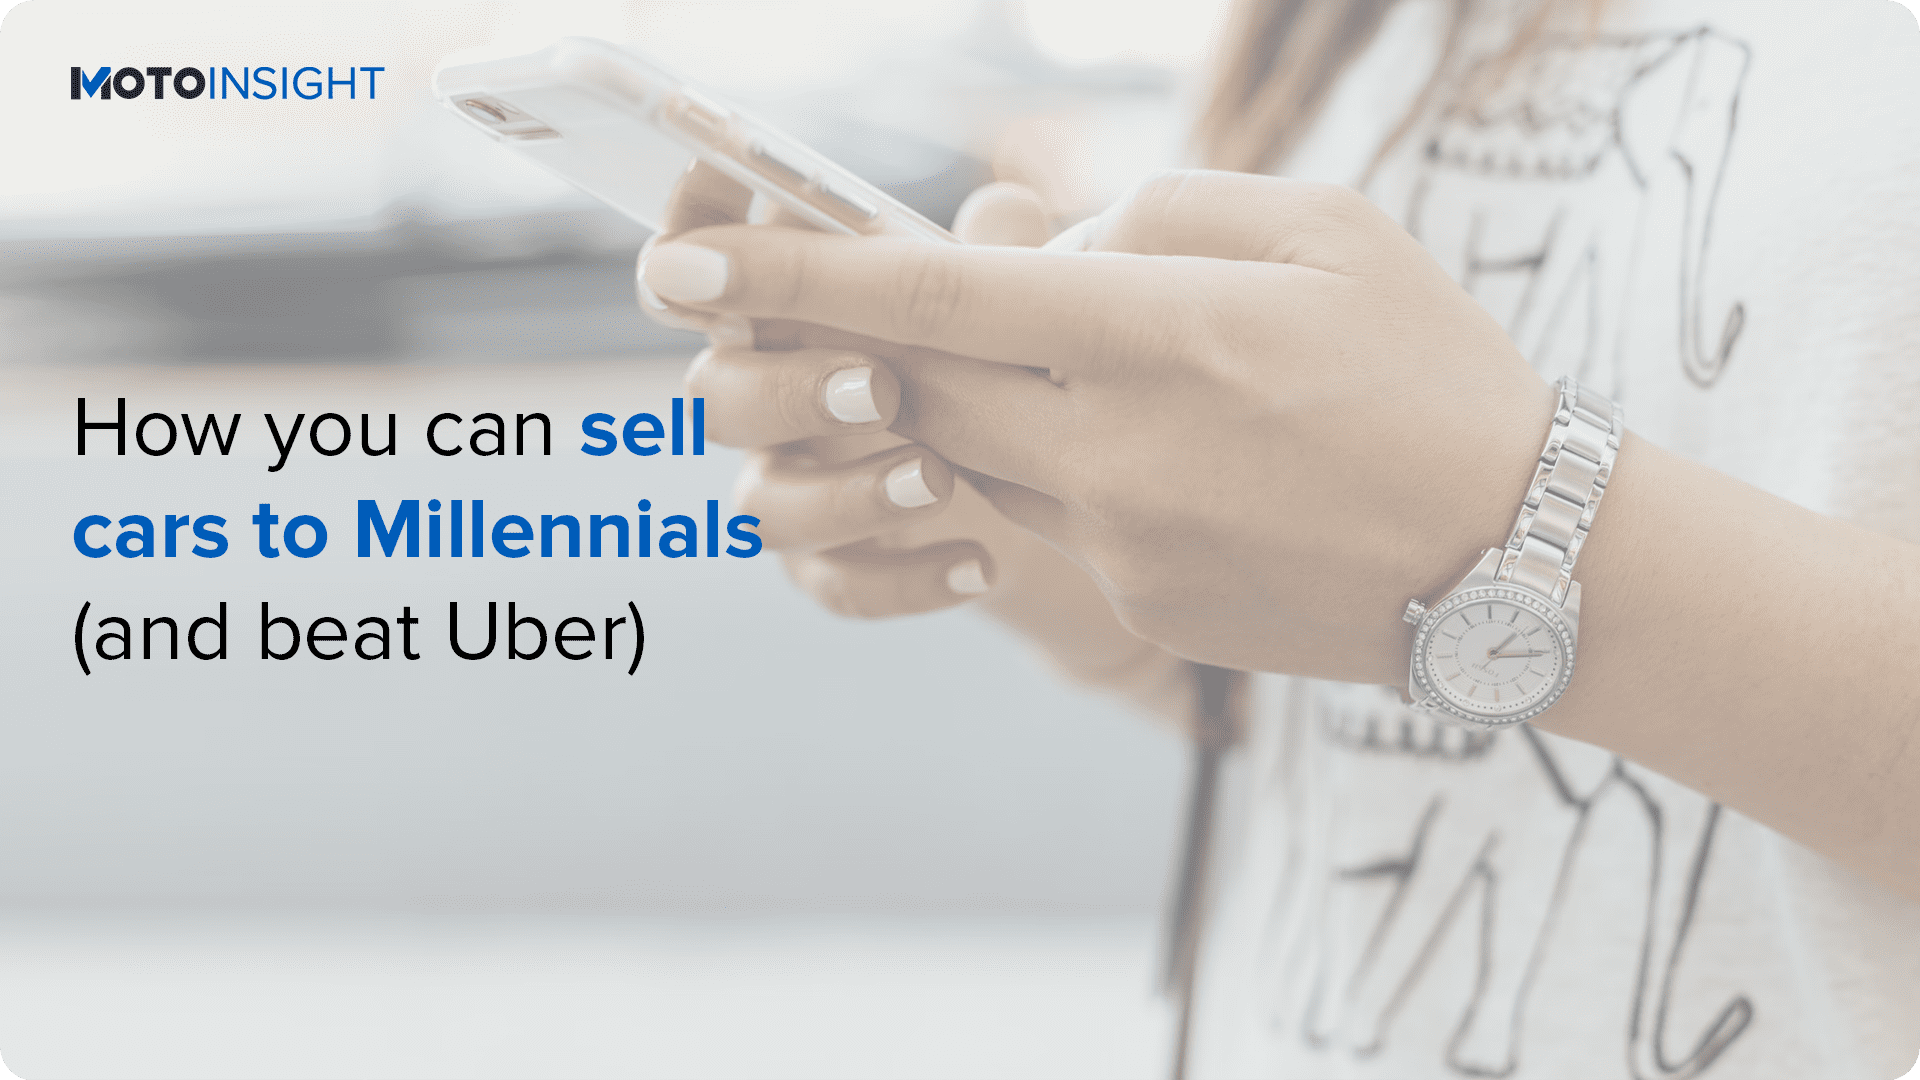 How you can sell cars to Millennials (and beat Uber)